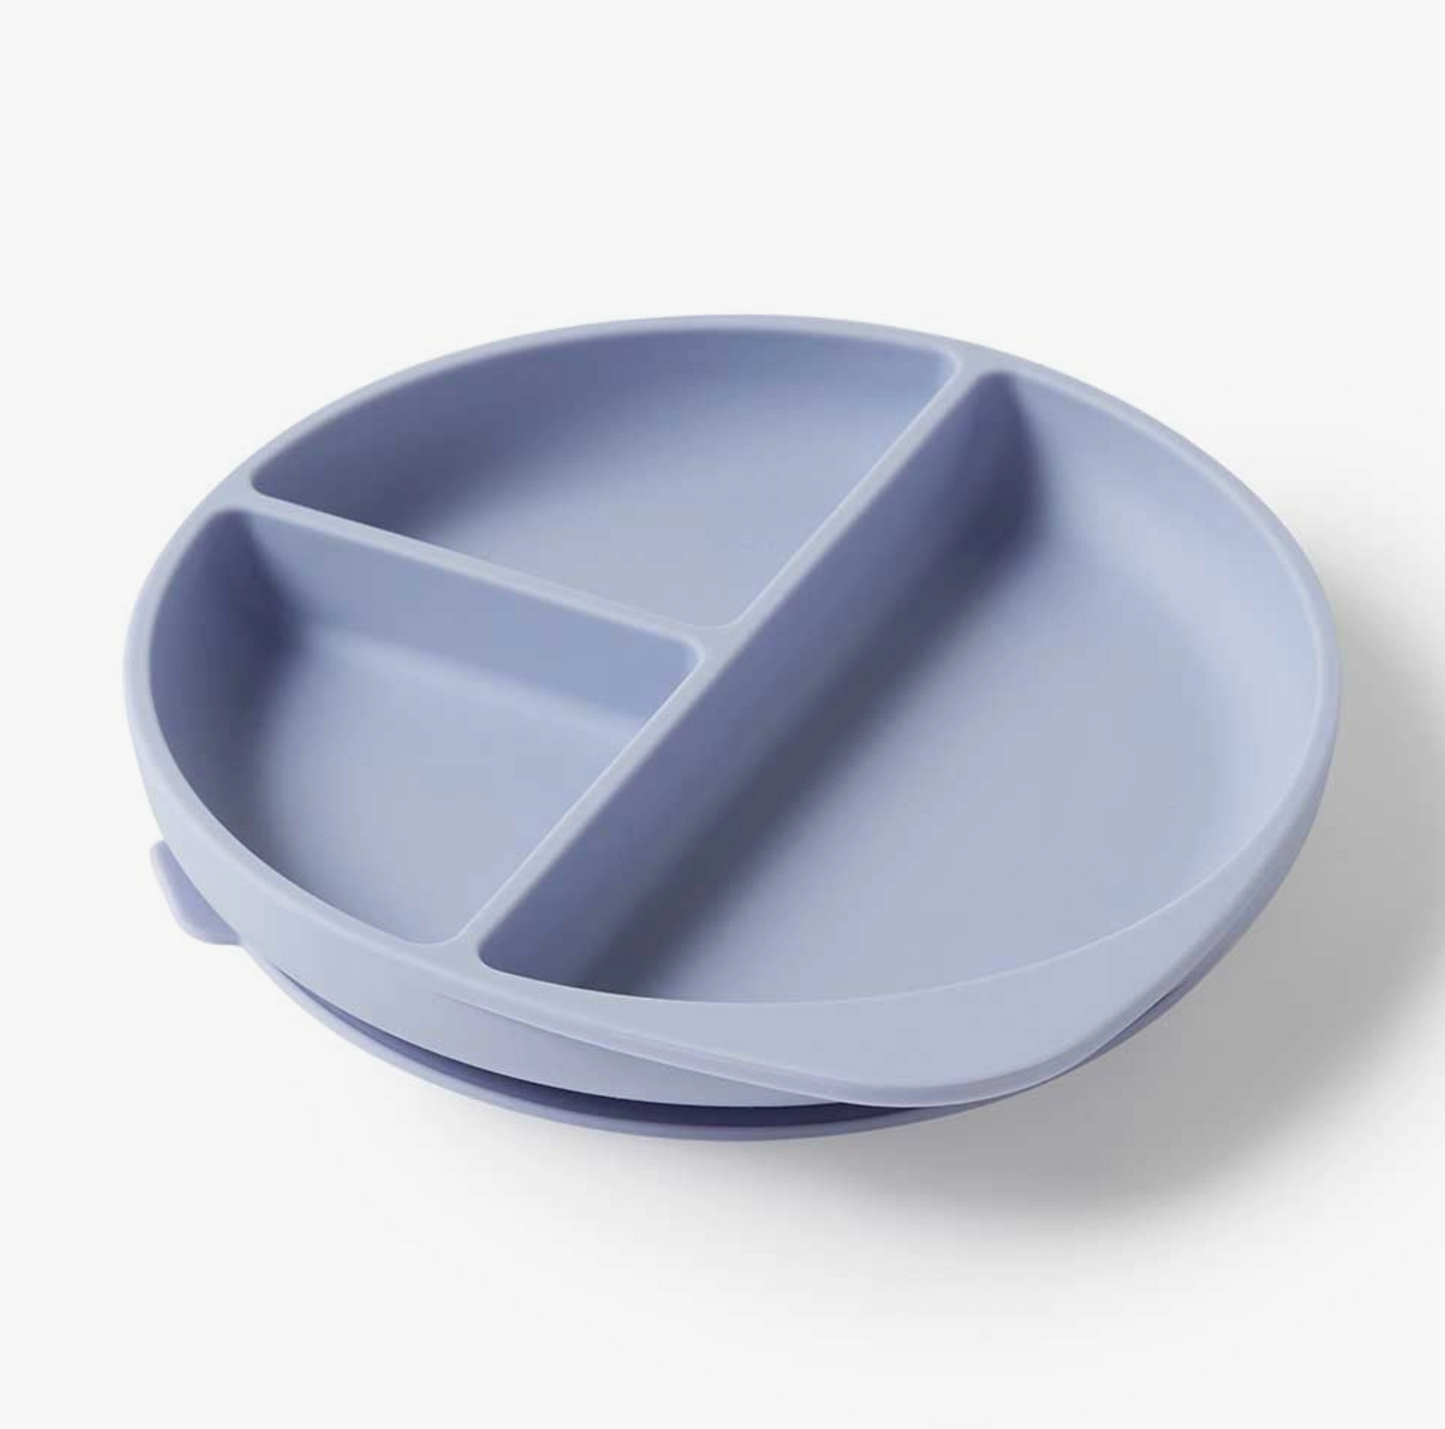 Snuggle Hunny - Silicone Suction Plate (Zen Blue)